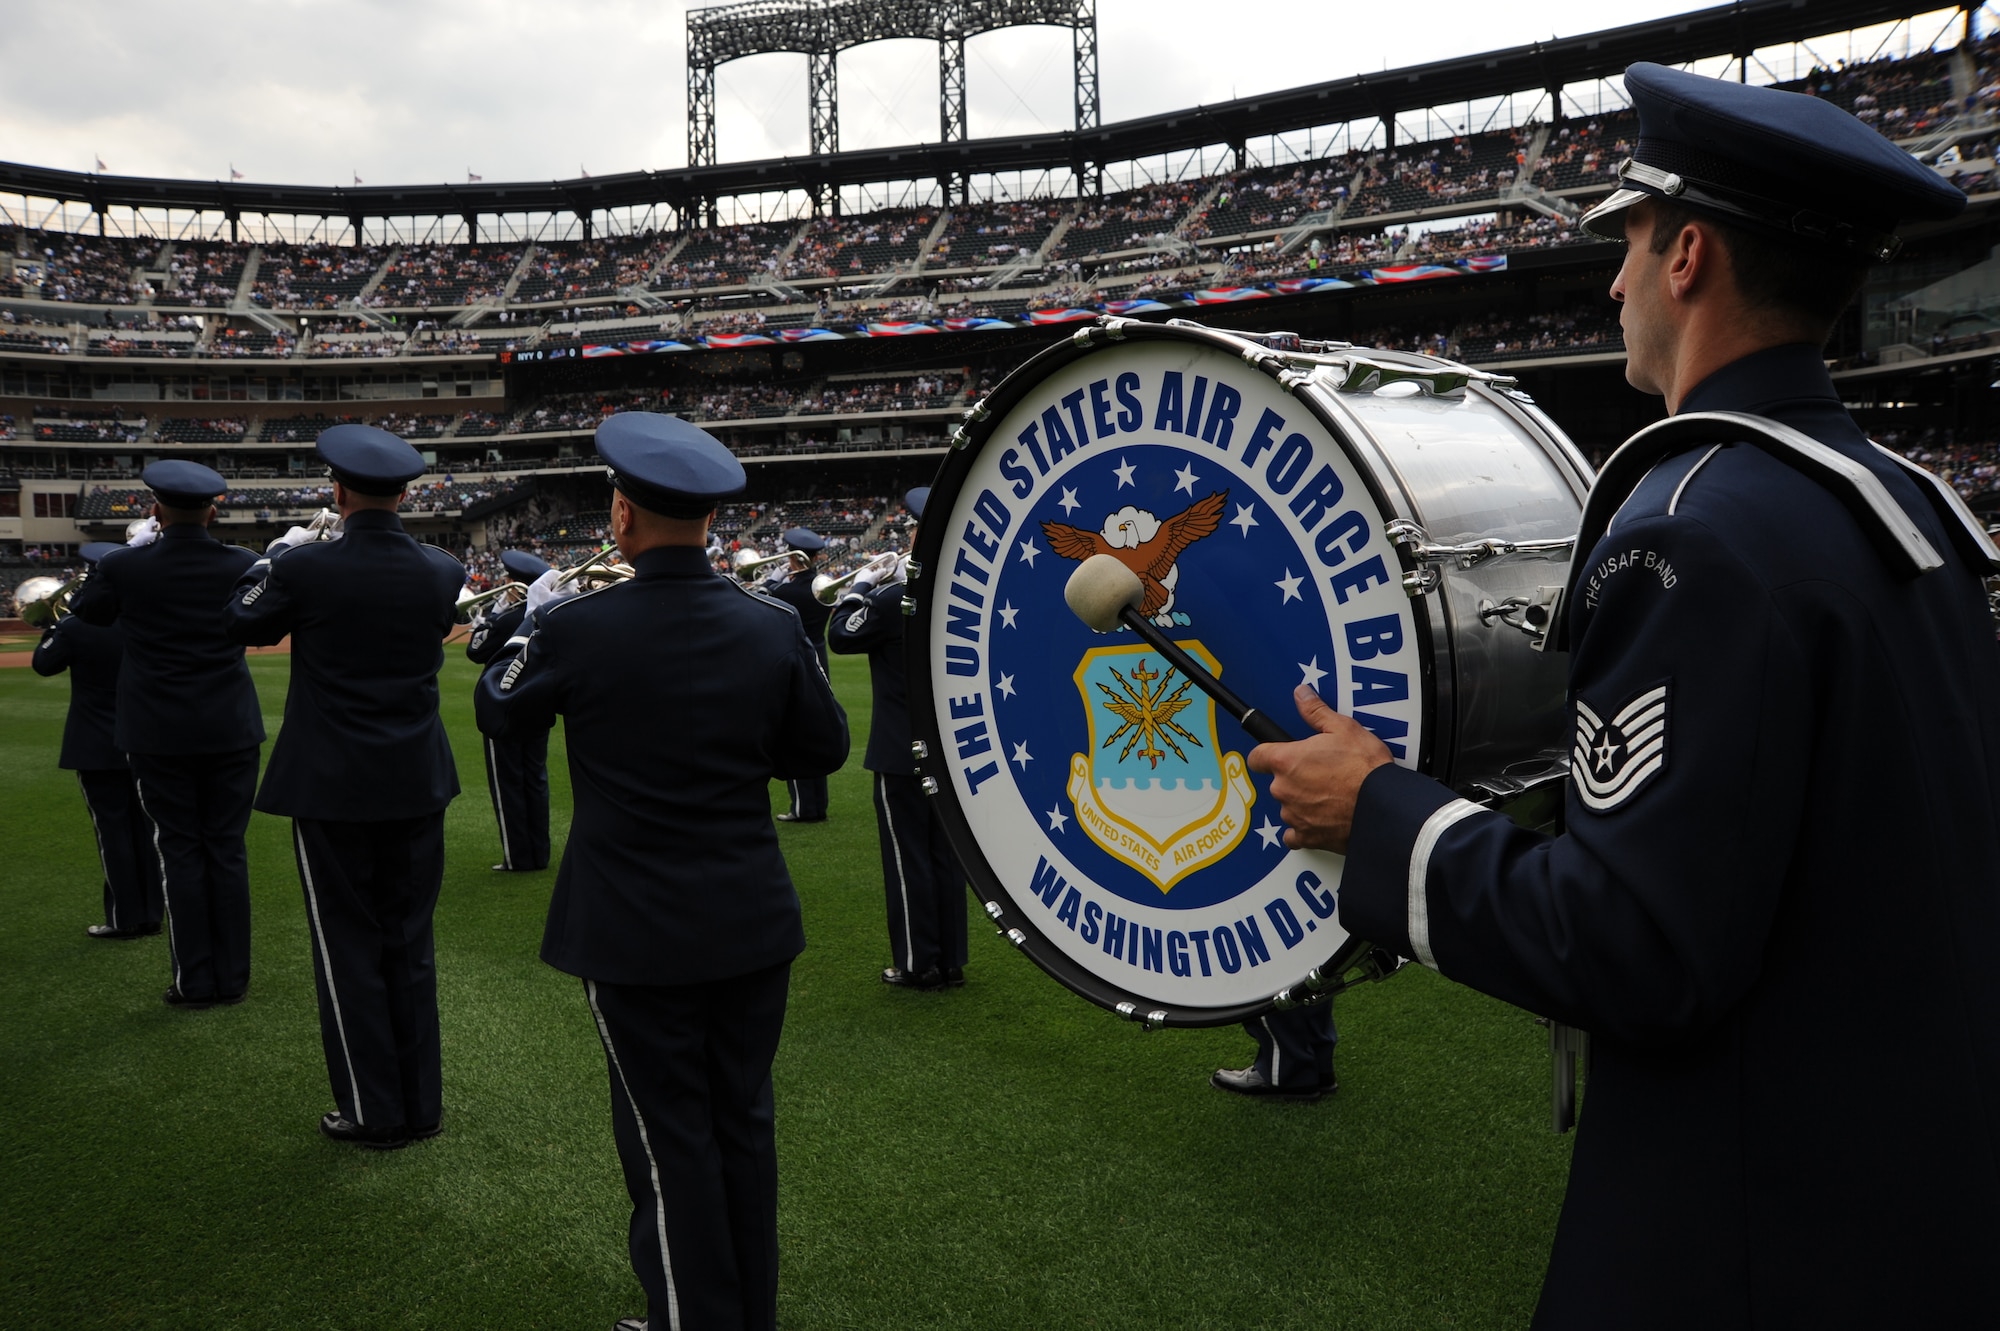 The U.S.  Air Force Band takes the outfield to perform patriotic songs and the United States National Anthem before the Mets vs. Yankees baseball game at Citi Field July 2 in New York. More than 25,000 newly created Americans died from battles and disease in the American revolutionary war fighting for our freedom 235 years ago. (U.S. Air Force photo by Staff Sgt. Christopher Ruano)